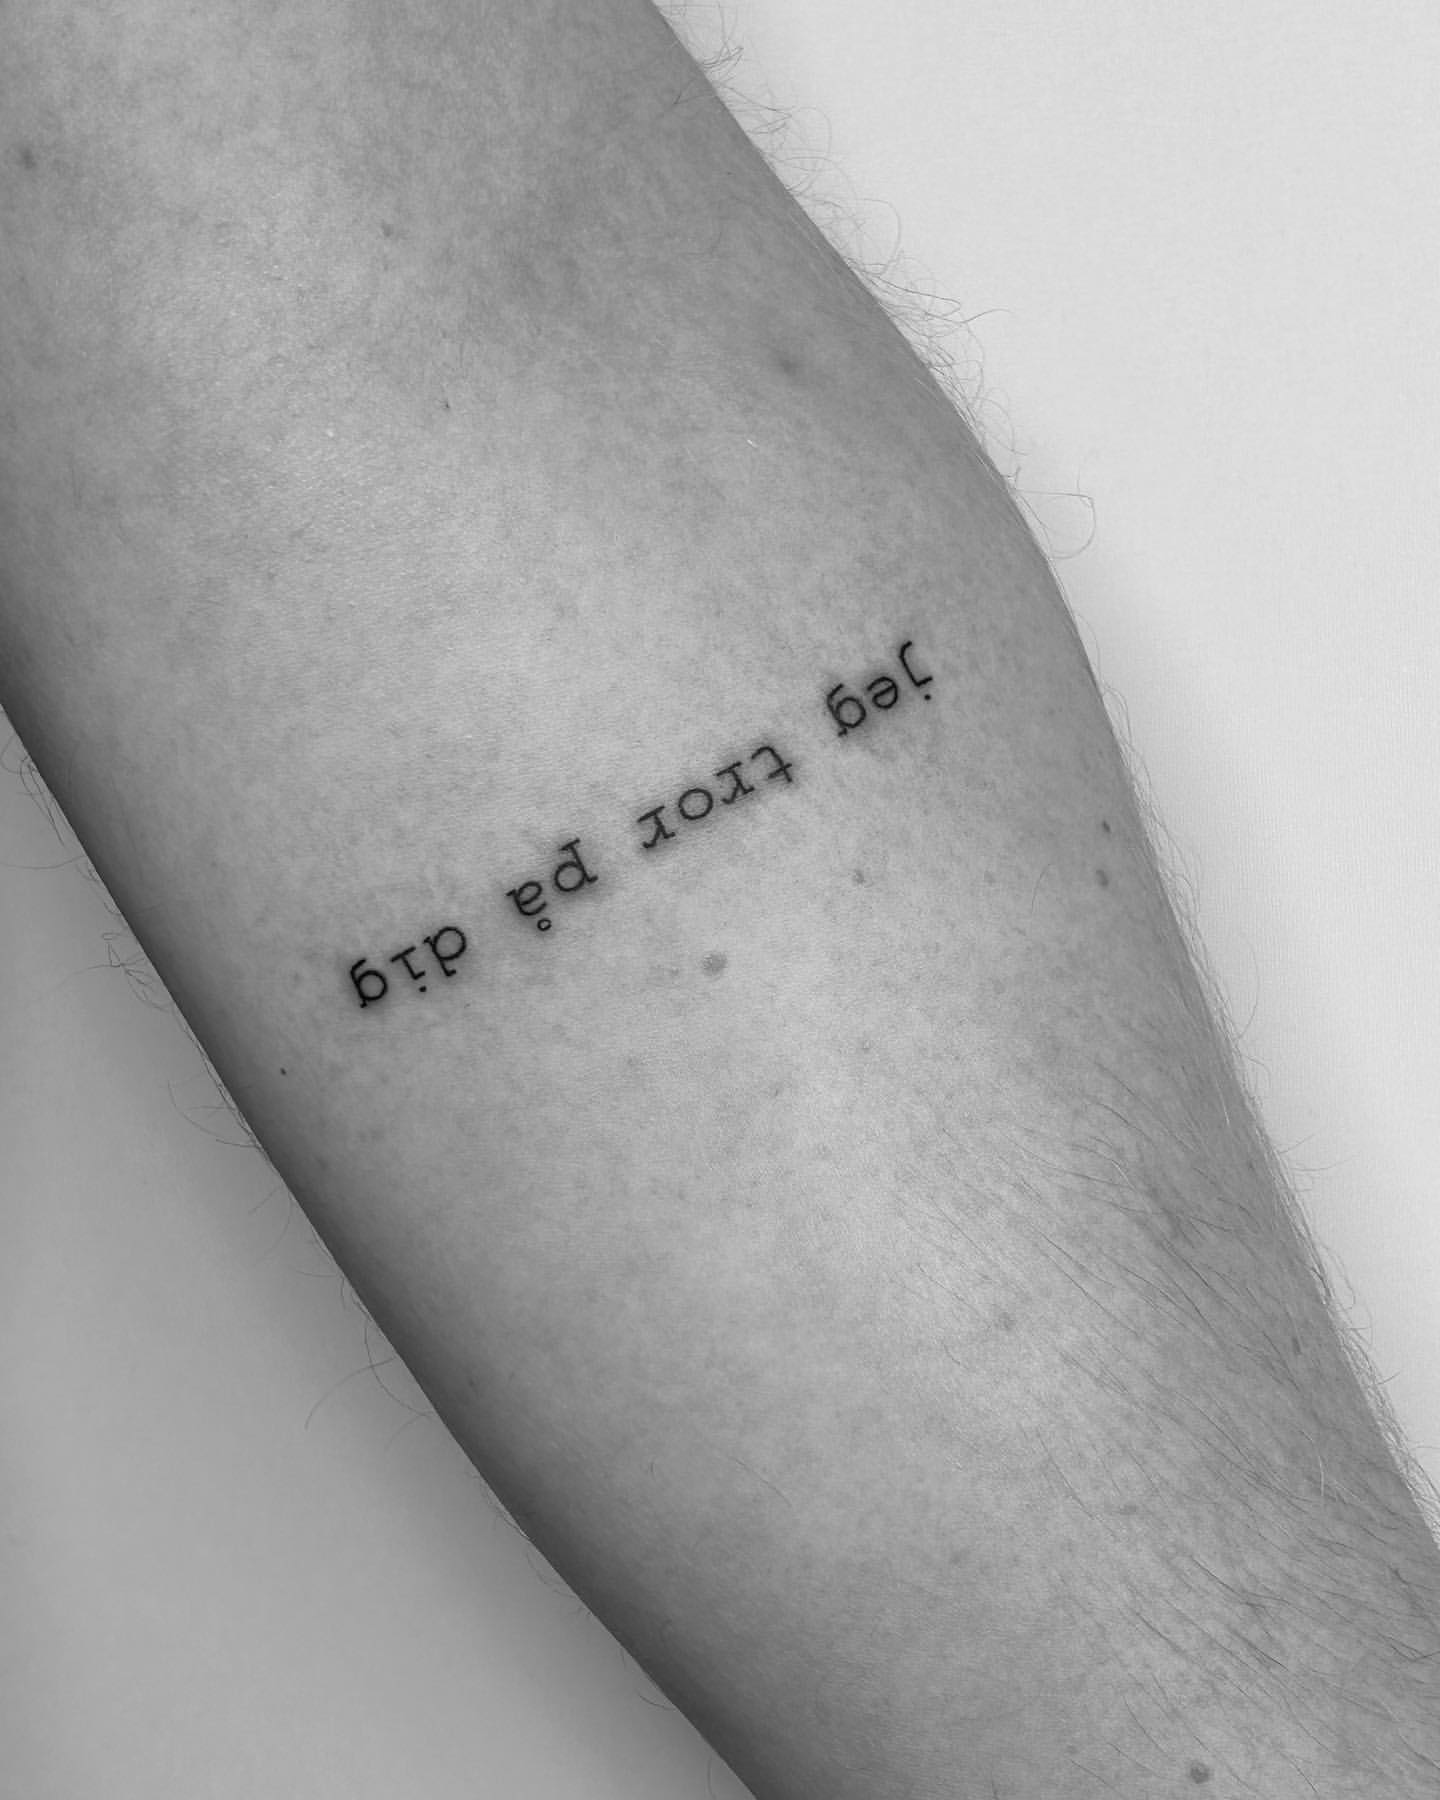 Tattoo uploaded by Ronnie Rasmussen • Italian proverb for 